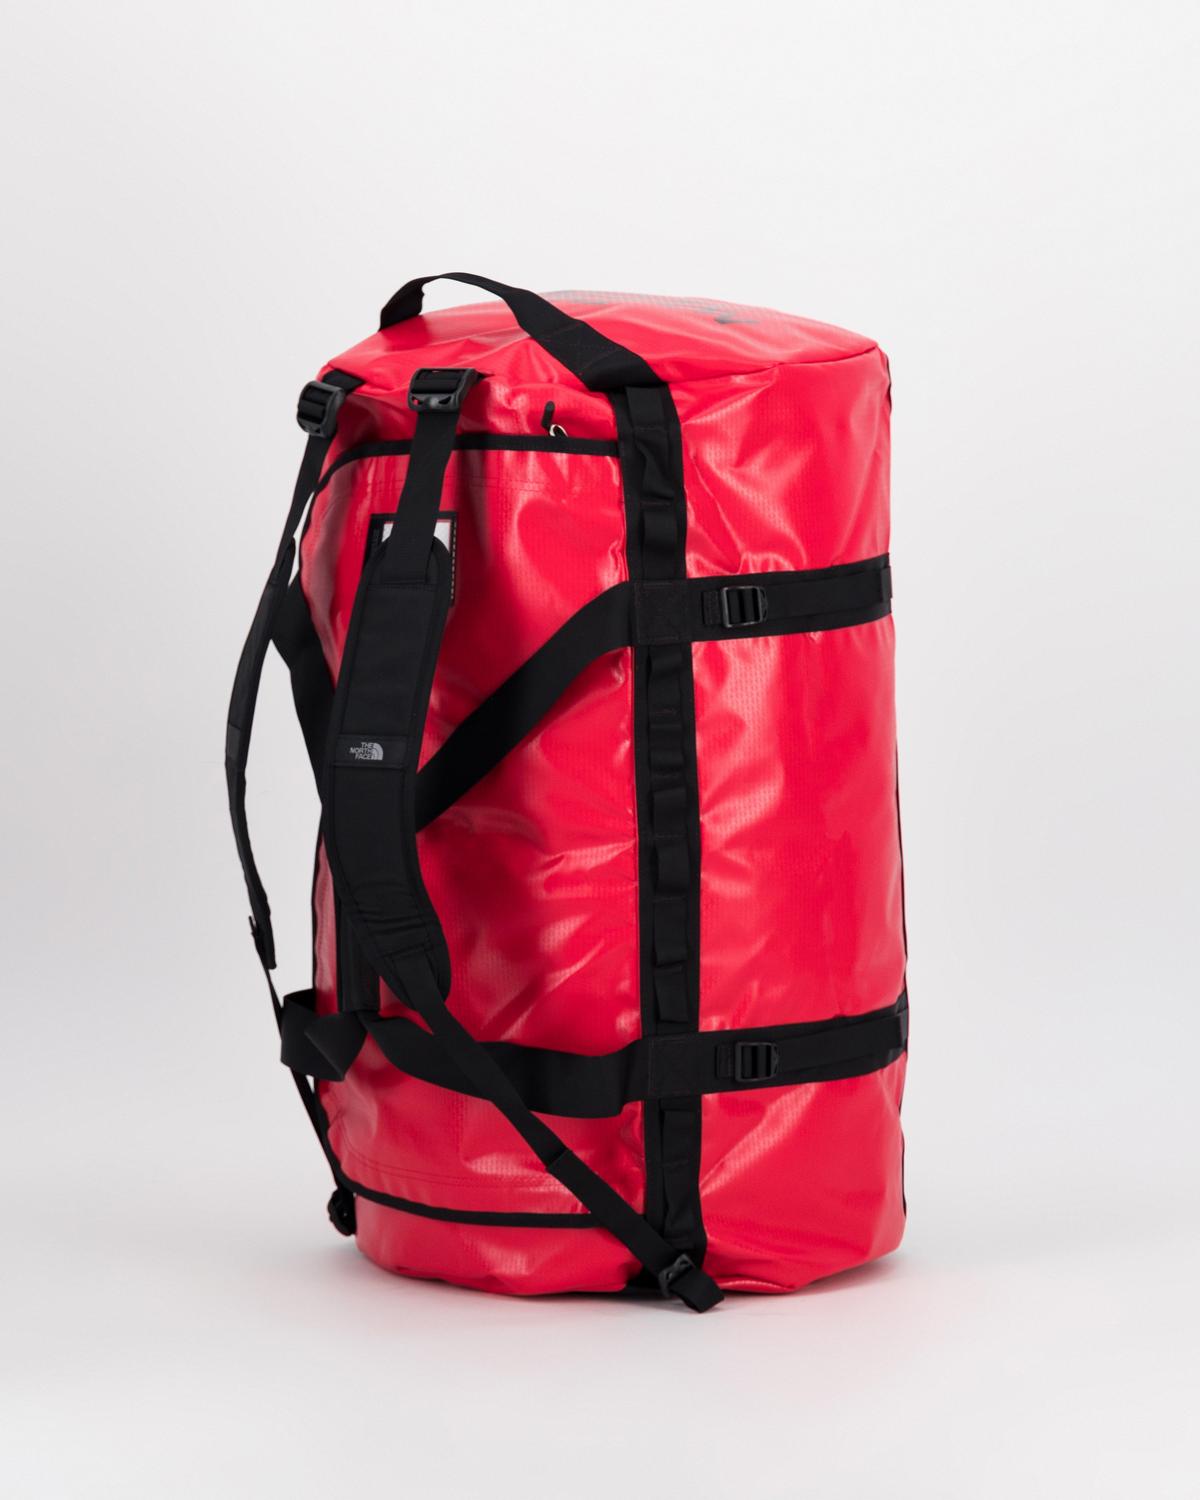 The North Face Extra-Large Base Camp Duffel Bag -  Red